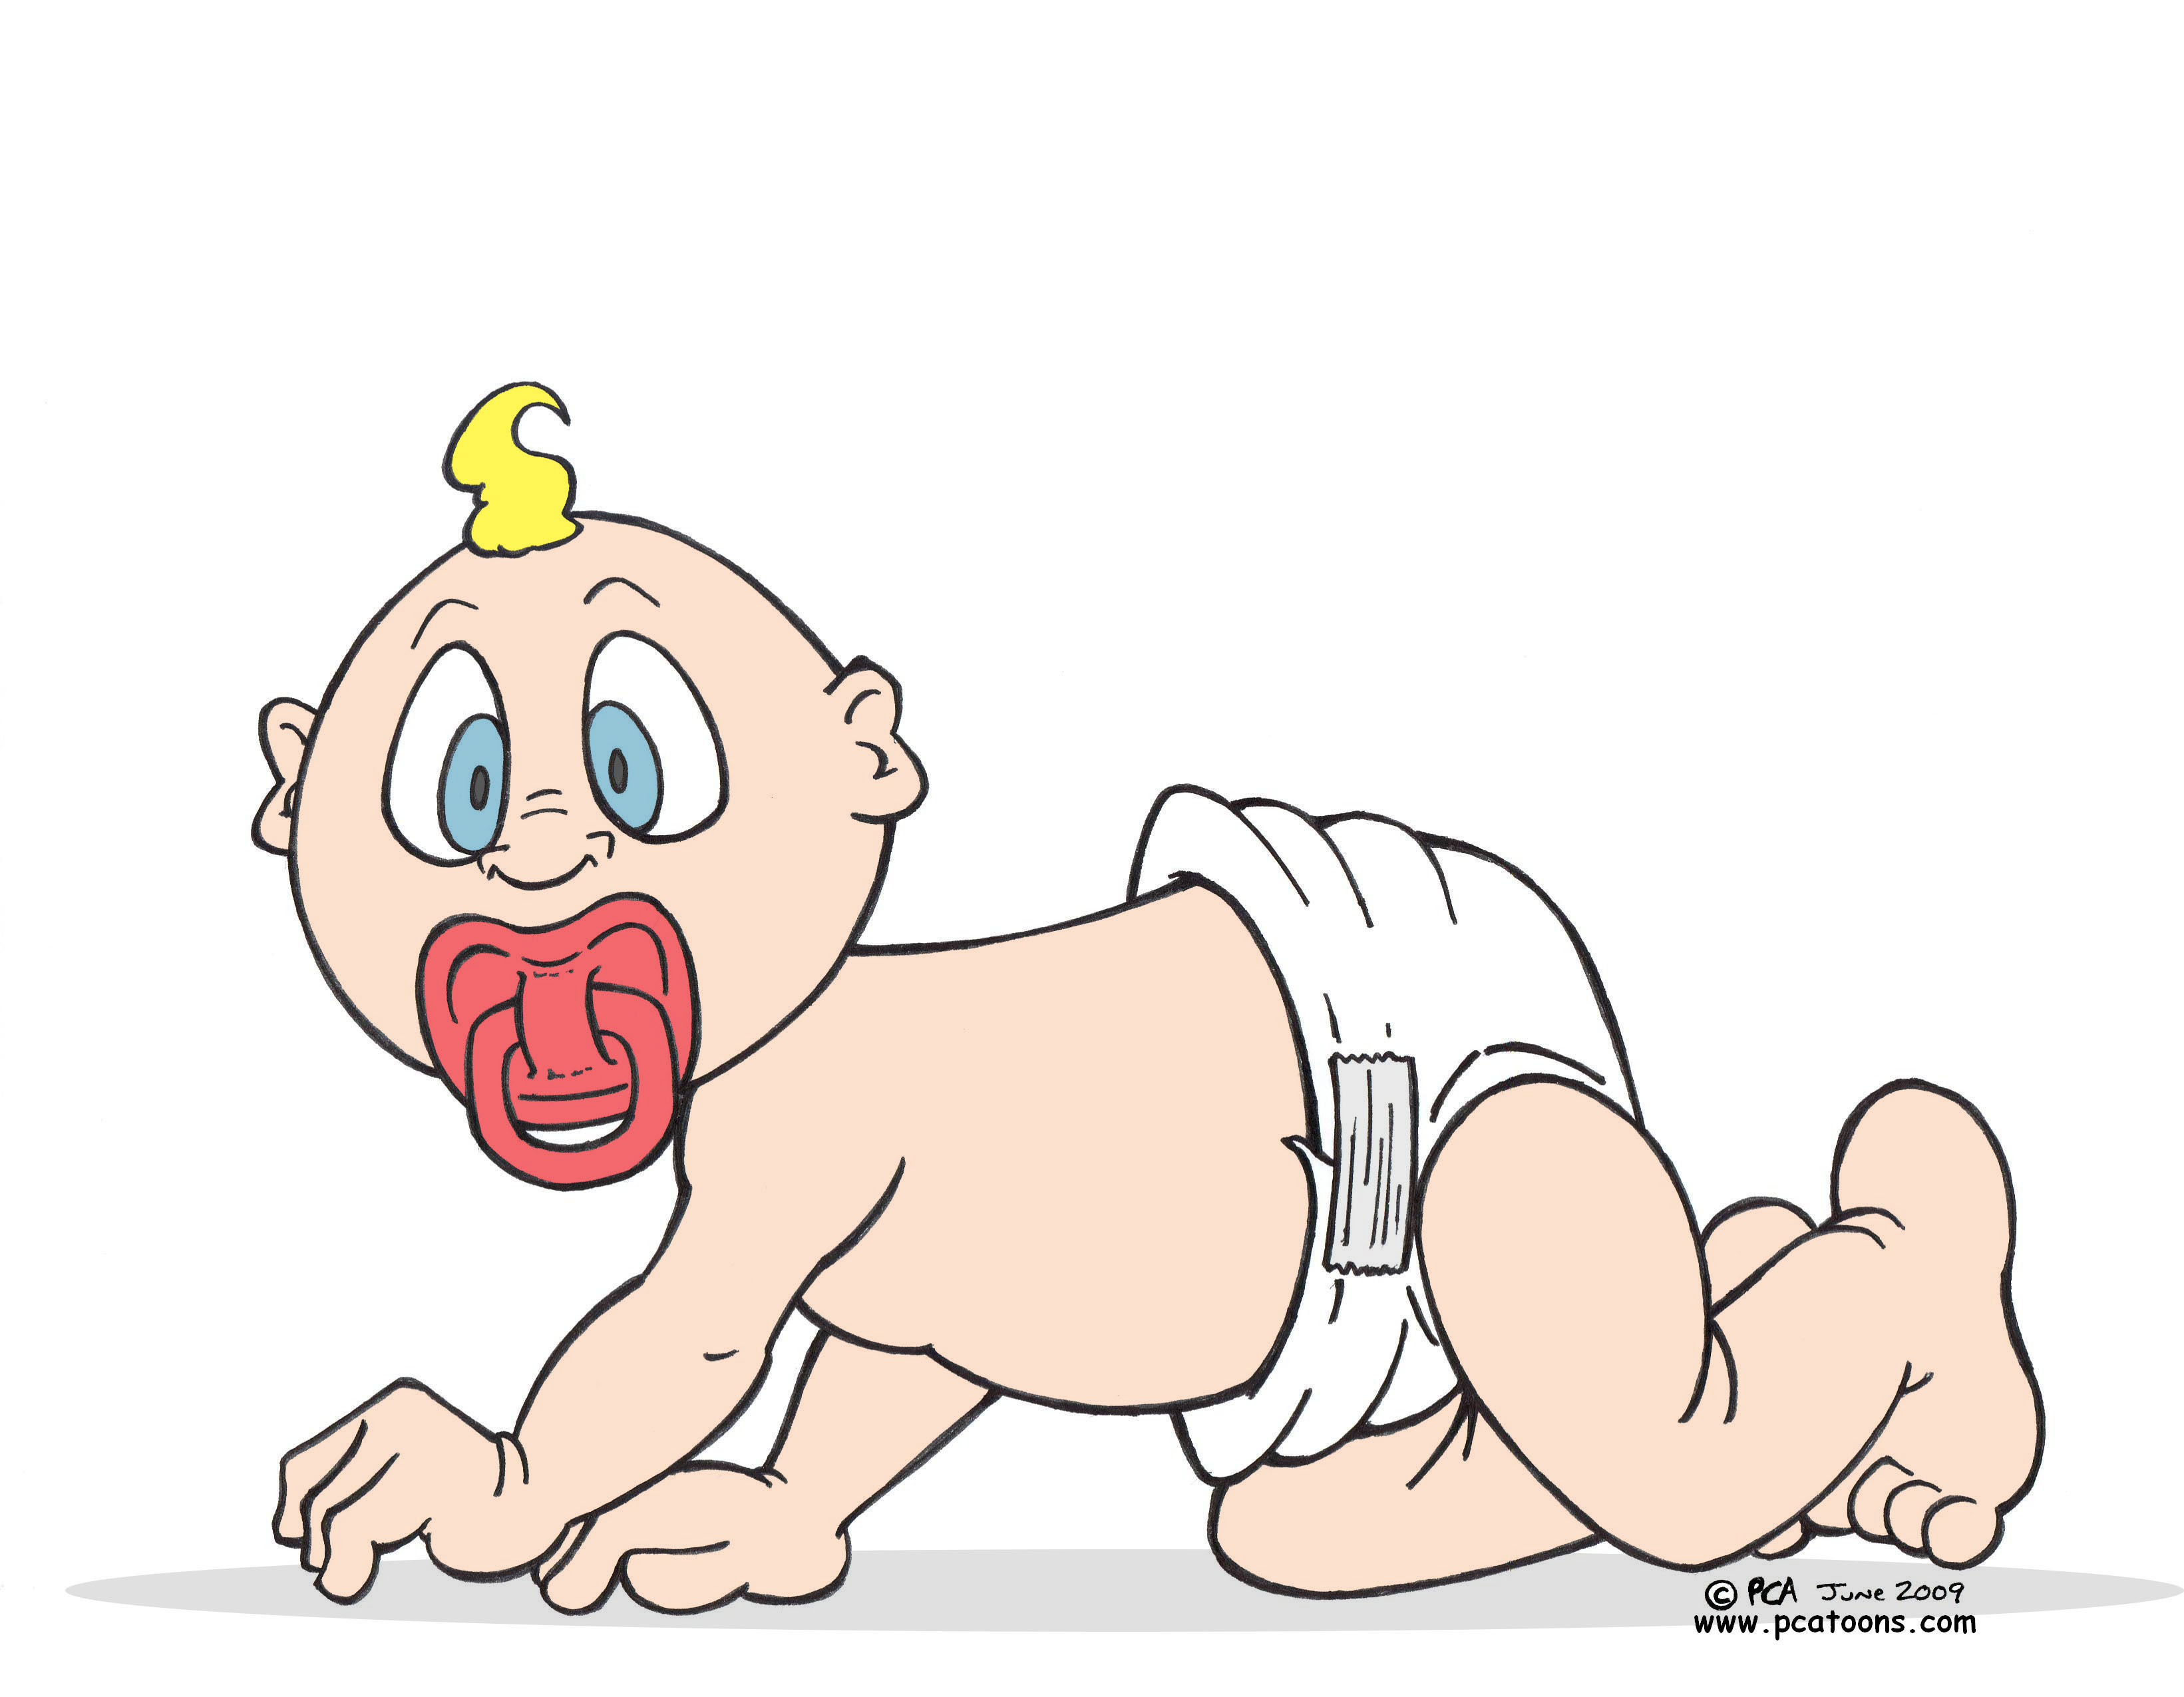 Funny Cartoons For Babies 22 Free Hd Wallpaper - Funnypicture.org